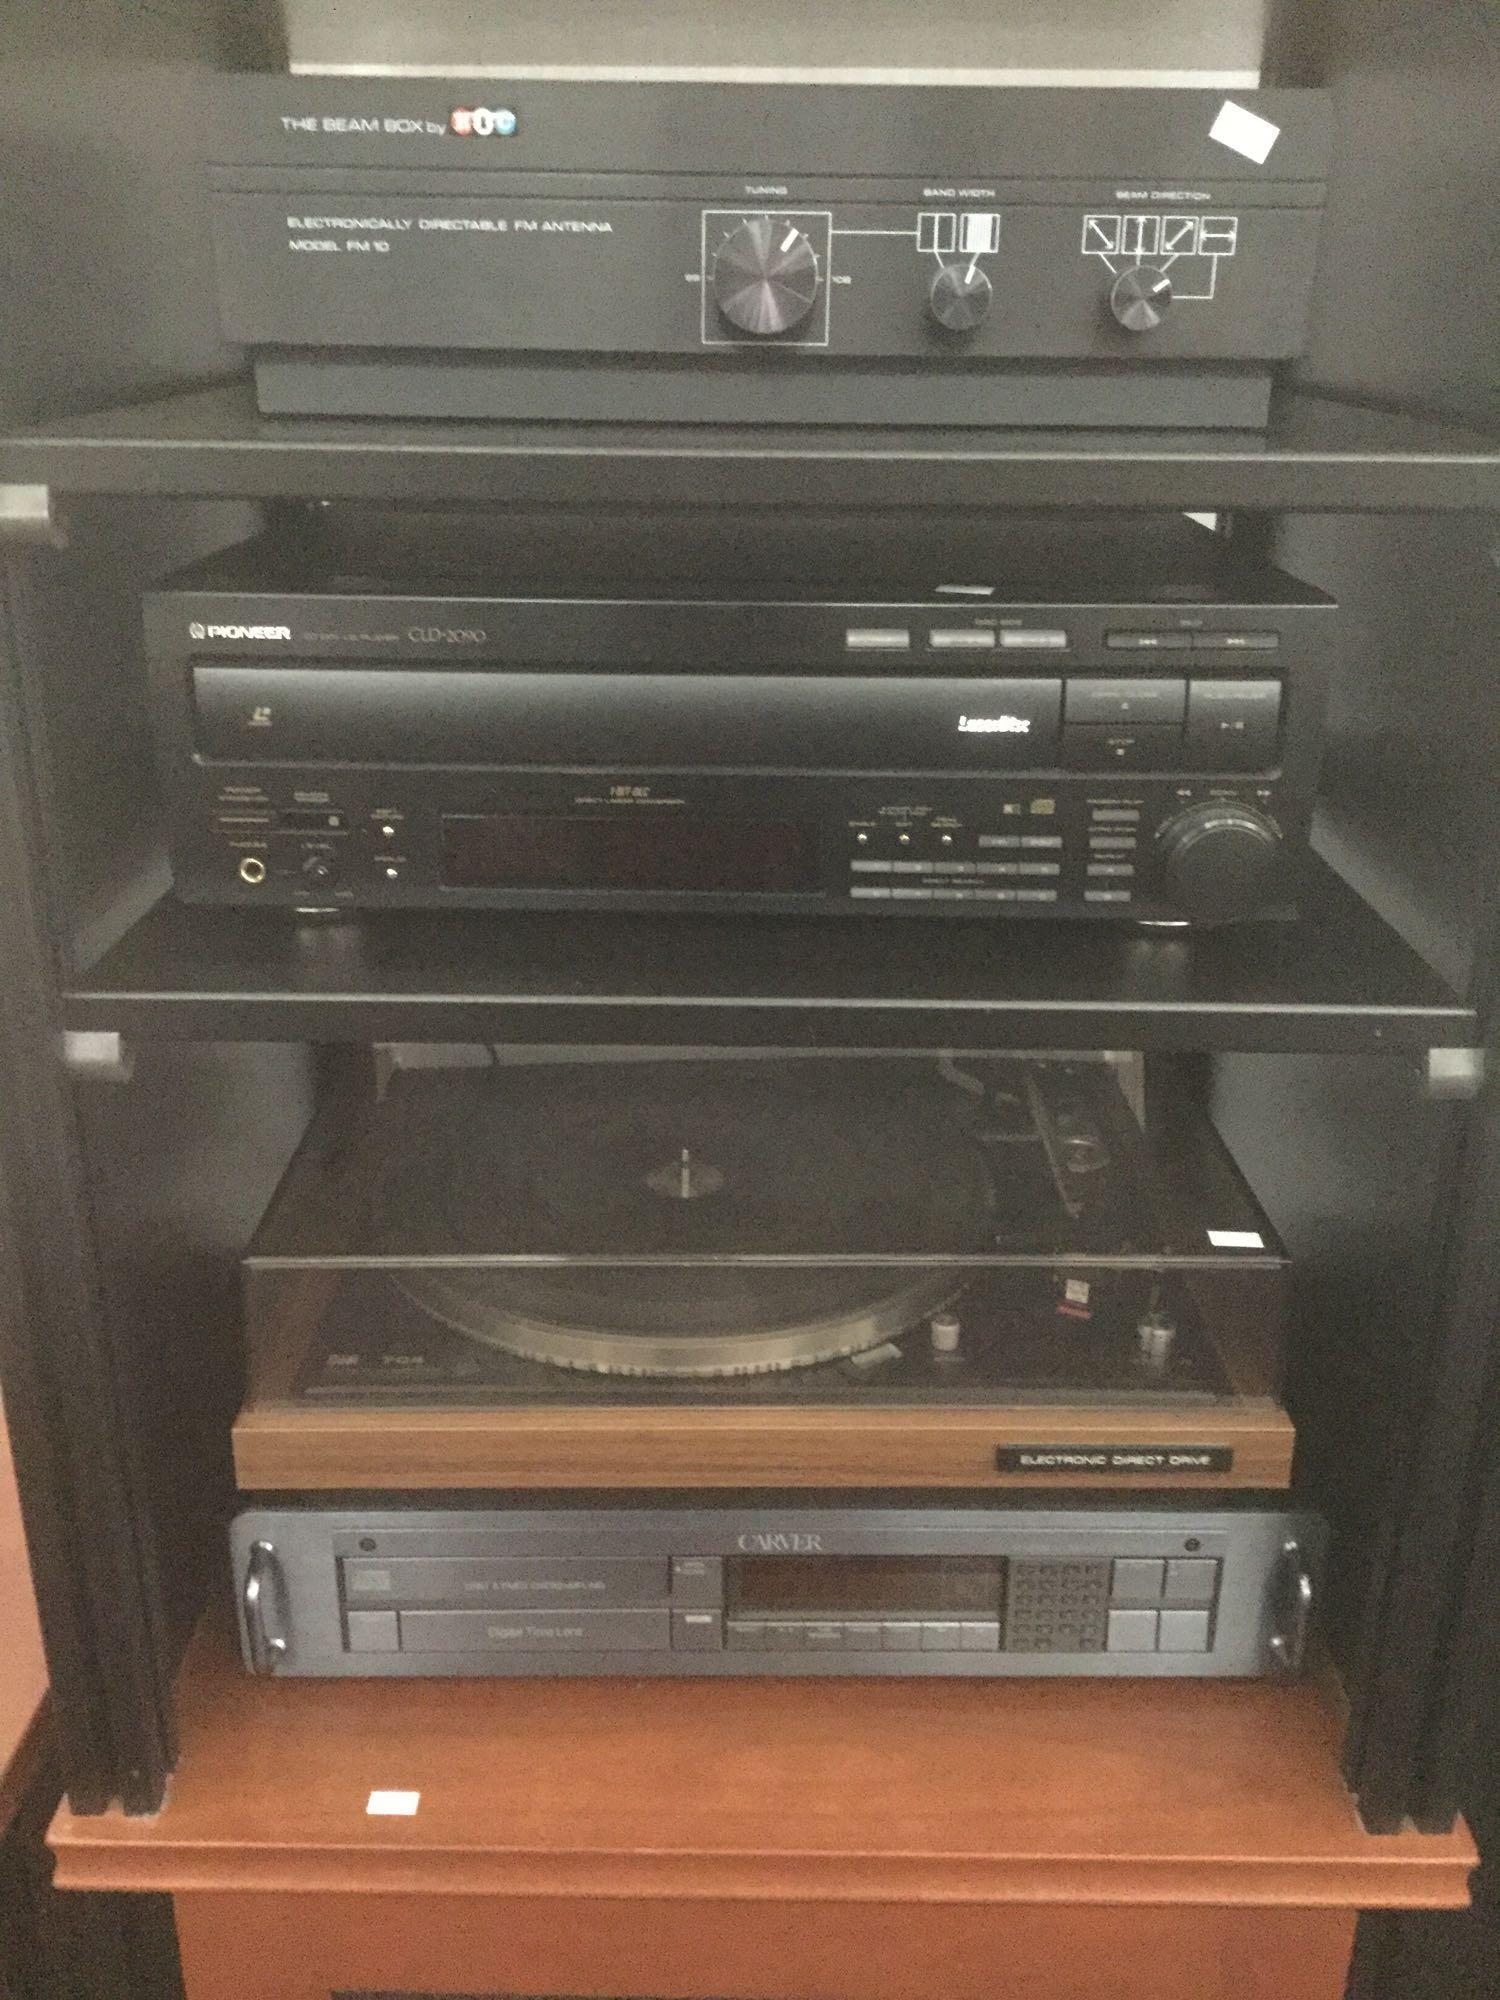 Massive complete media system incl. Pioneer CLD-2090 Laserdisc, Yamaha RX-V3300 receiver, and more